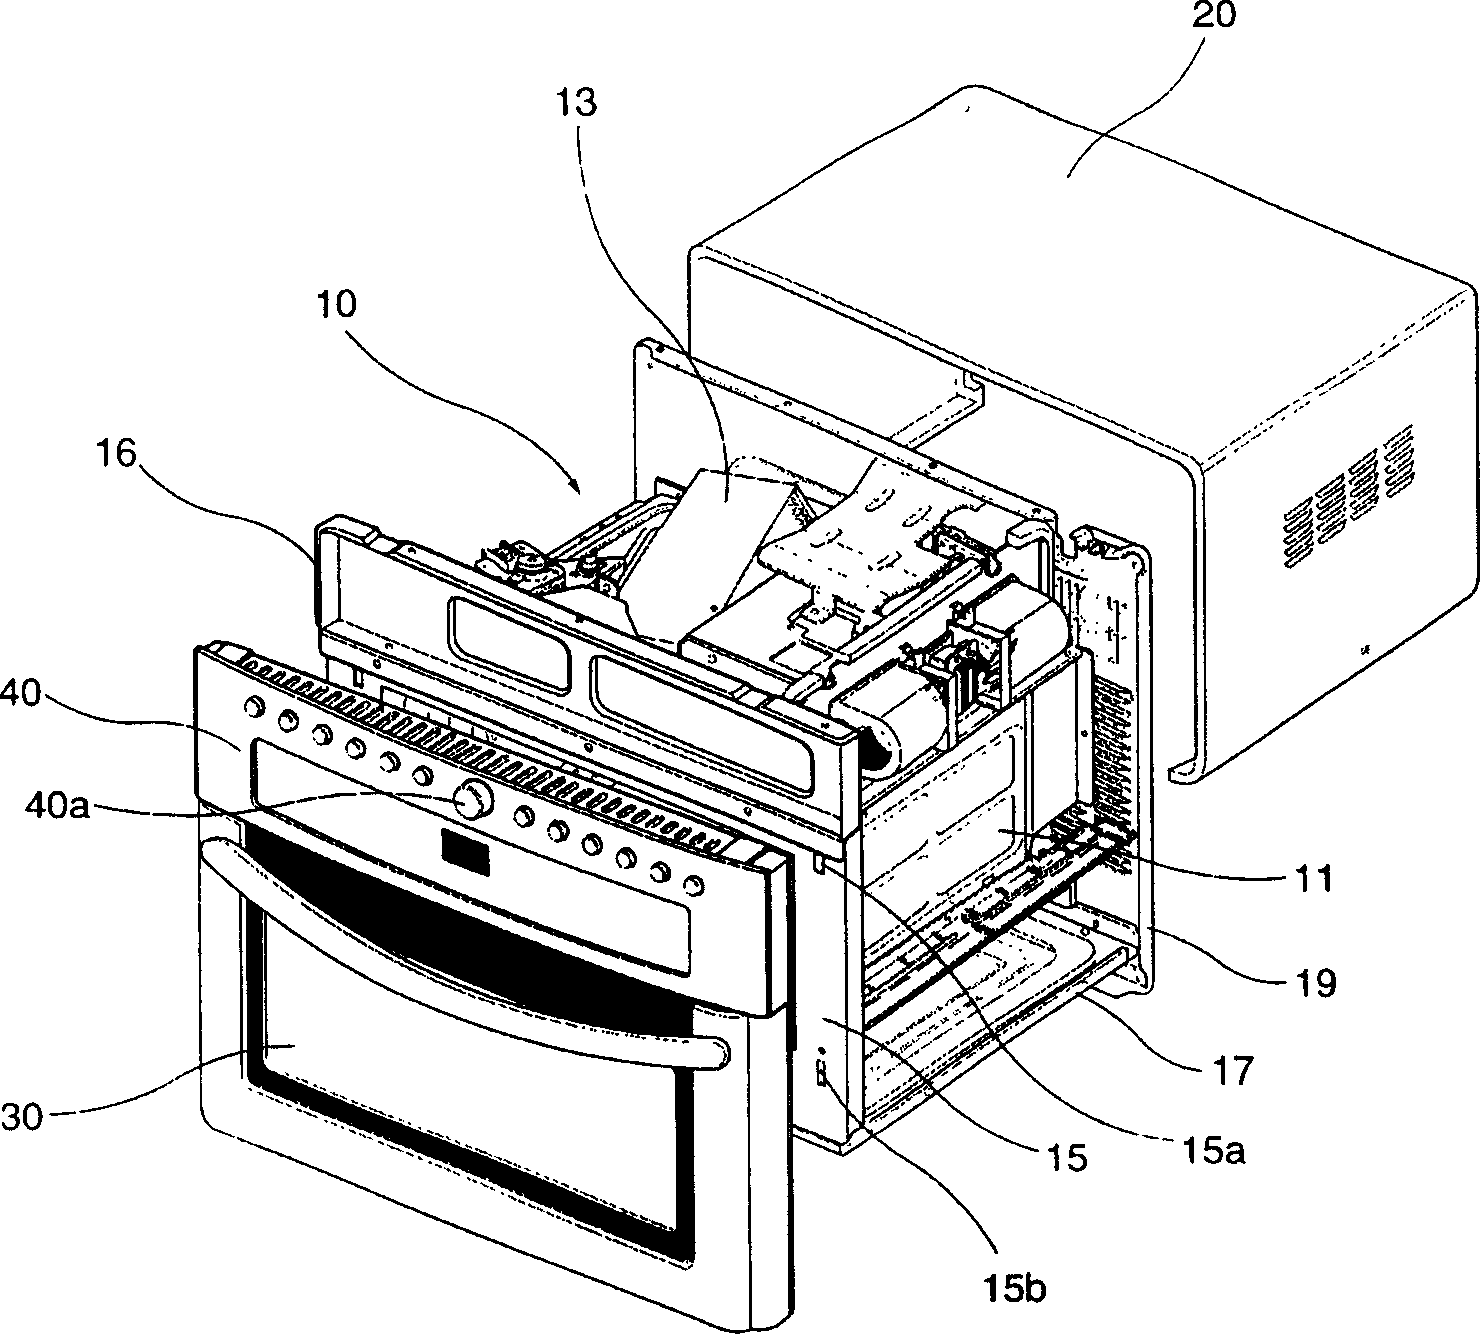 Closing plate mounting structure of microwave oven